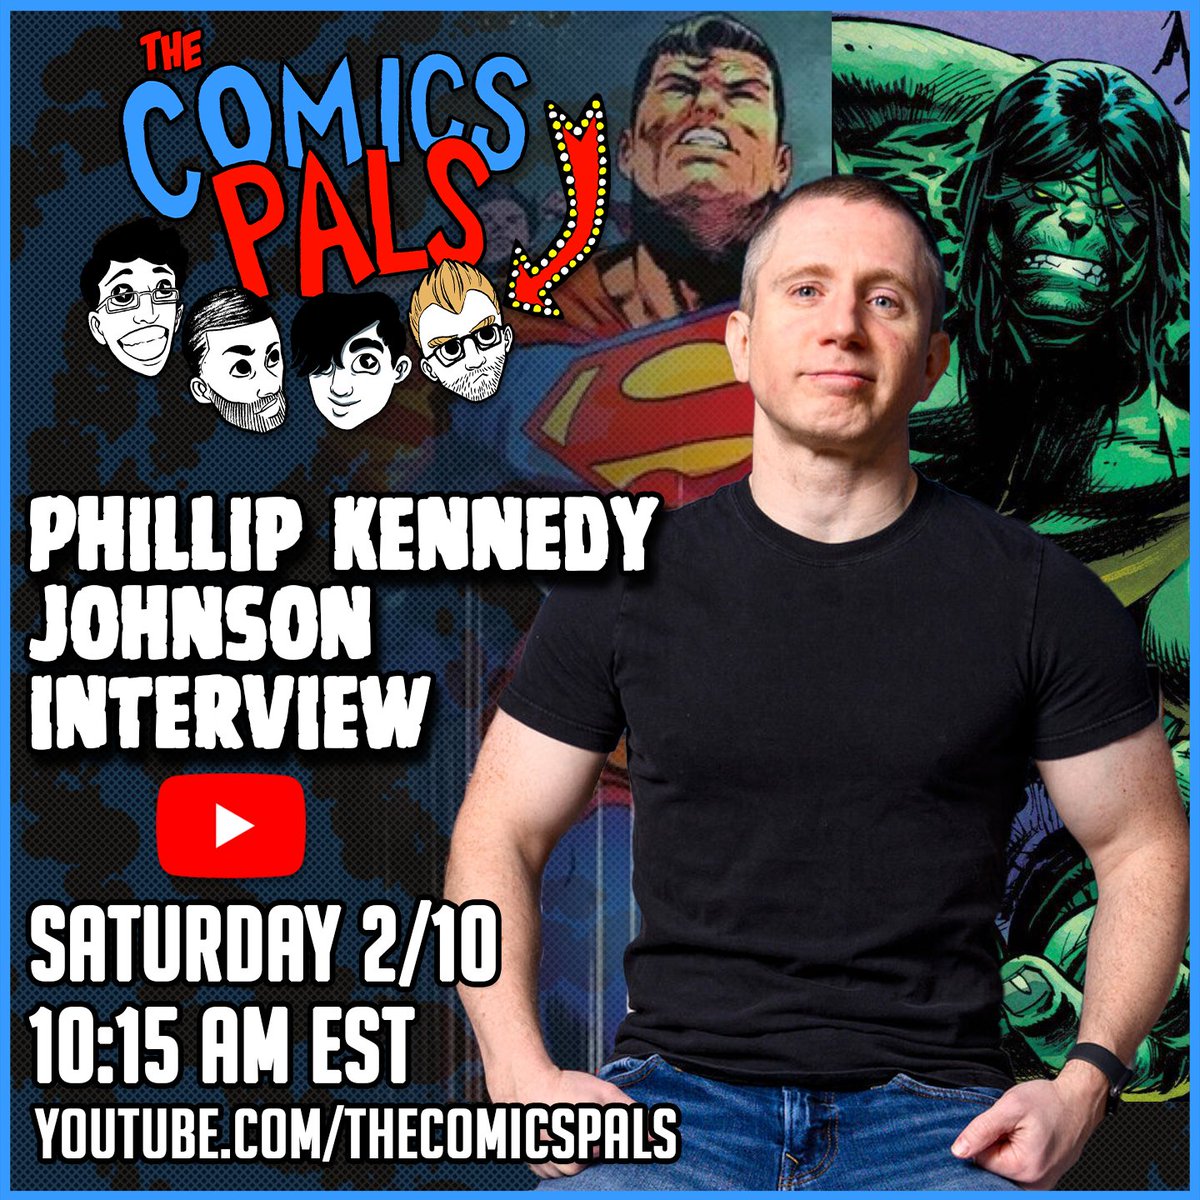 Don't miss us THIS SATURDAY at 10:15am EST when we'll be joined by @PhillipKJohnson! We'll be talking ACTION COMICS, INCREDIBLE HULK, GREEN LANTERN: WAR JOURNAL & more! We'll also be giving away ONE copy of the first trade of any of those three books! Details below 👇